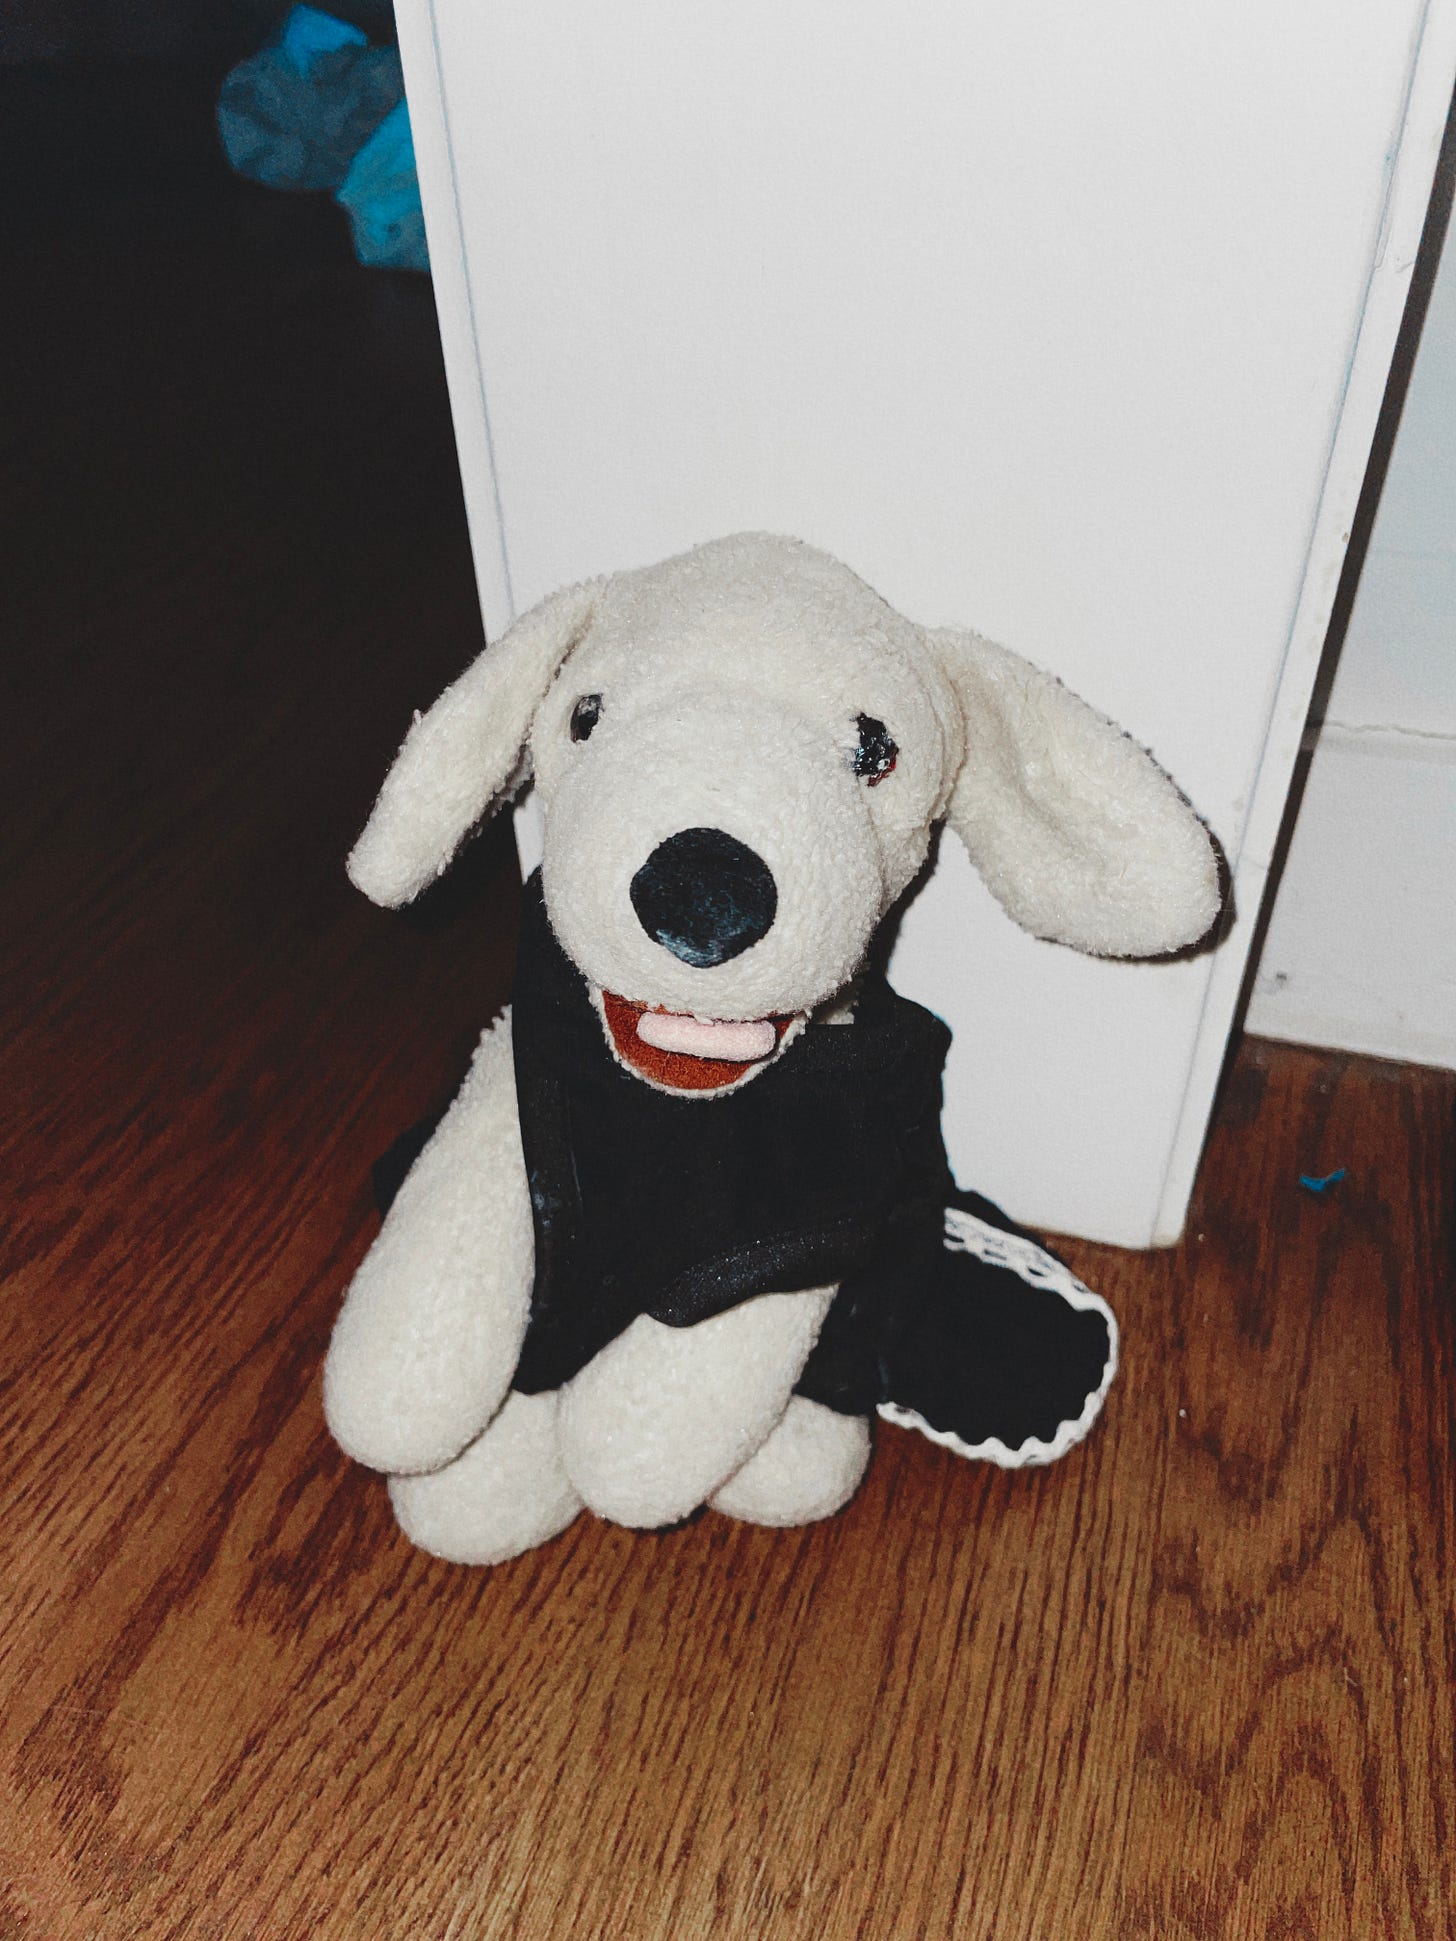 a white, short-haired stuffed dog wearing a black dress